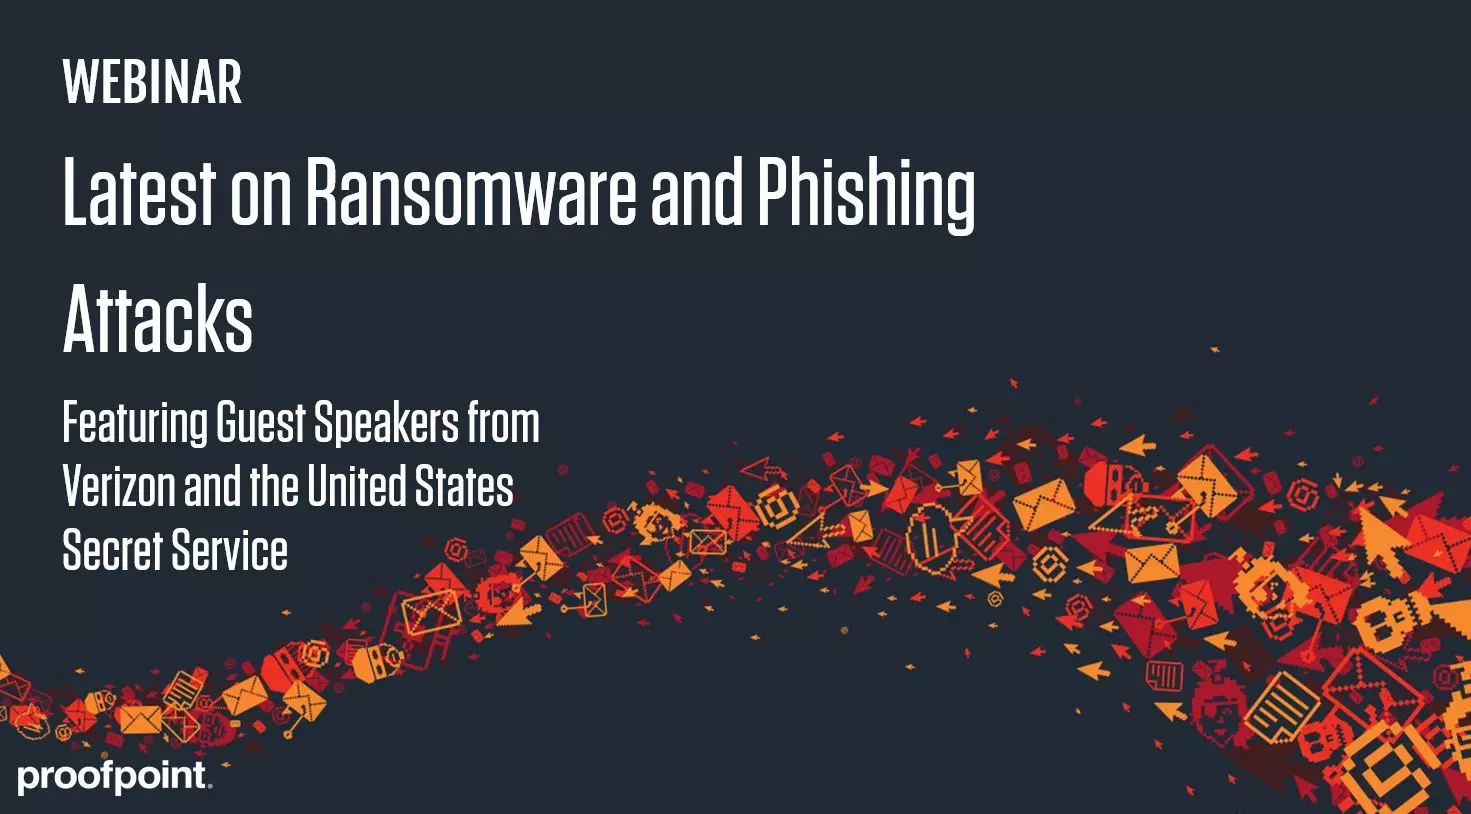 Latest on Ransomware and Phishing Attacks